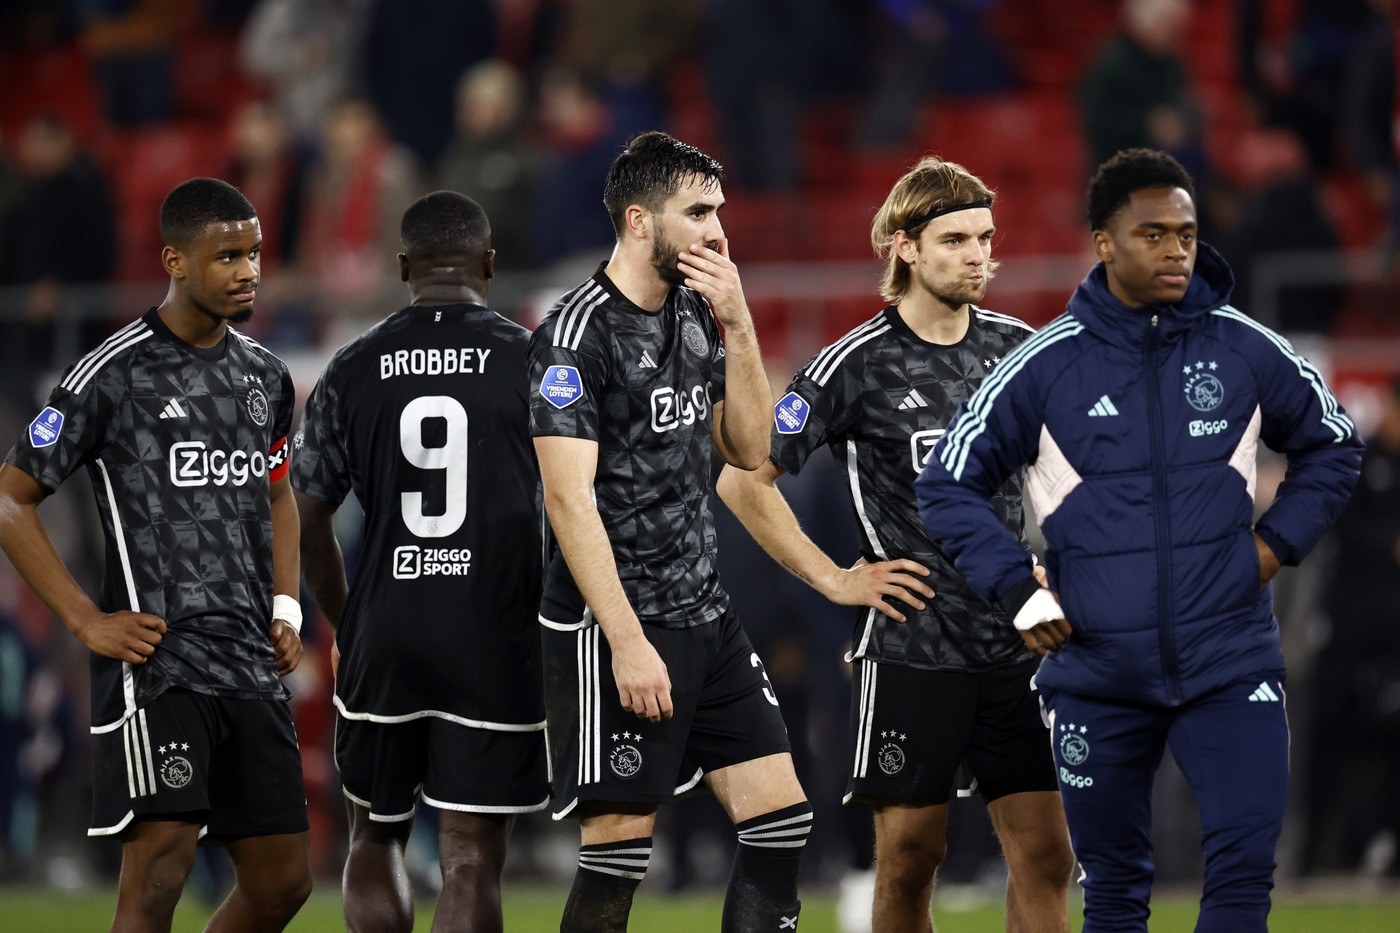 2/25/2024 - ALKMAAR - (l-r) Jorrel Hato of Ajax, Brian Brobbey of Ajax, Josip Sutalo of Ajax, Borna Sosa of Ajax disappointment after the Dutch Eredivisie match between AZ Alkmaar and Ajax Amsterdam at the AFAS stadium on February 25, 2024 in Alkmaar, Netherlands . ANP MAURICE VAN STEEN /ANP/Sipa USA,Image: 850684805, License: Rights-managed, Restrictions: *** World Rights Except Belgium, France, Germany, The Netherlands, and the UK ***  BELOUT DEUOUT FRAOUT GBROUT NLDOUT, Model Release: no, Credit line: ANP / ddp USA / Profimedia